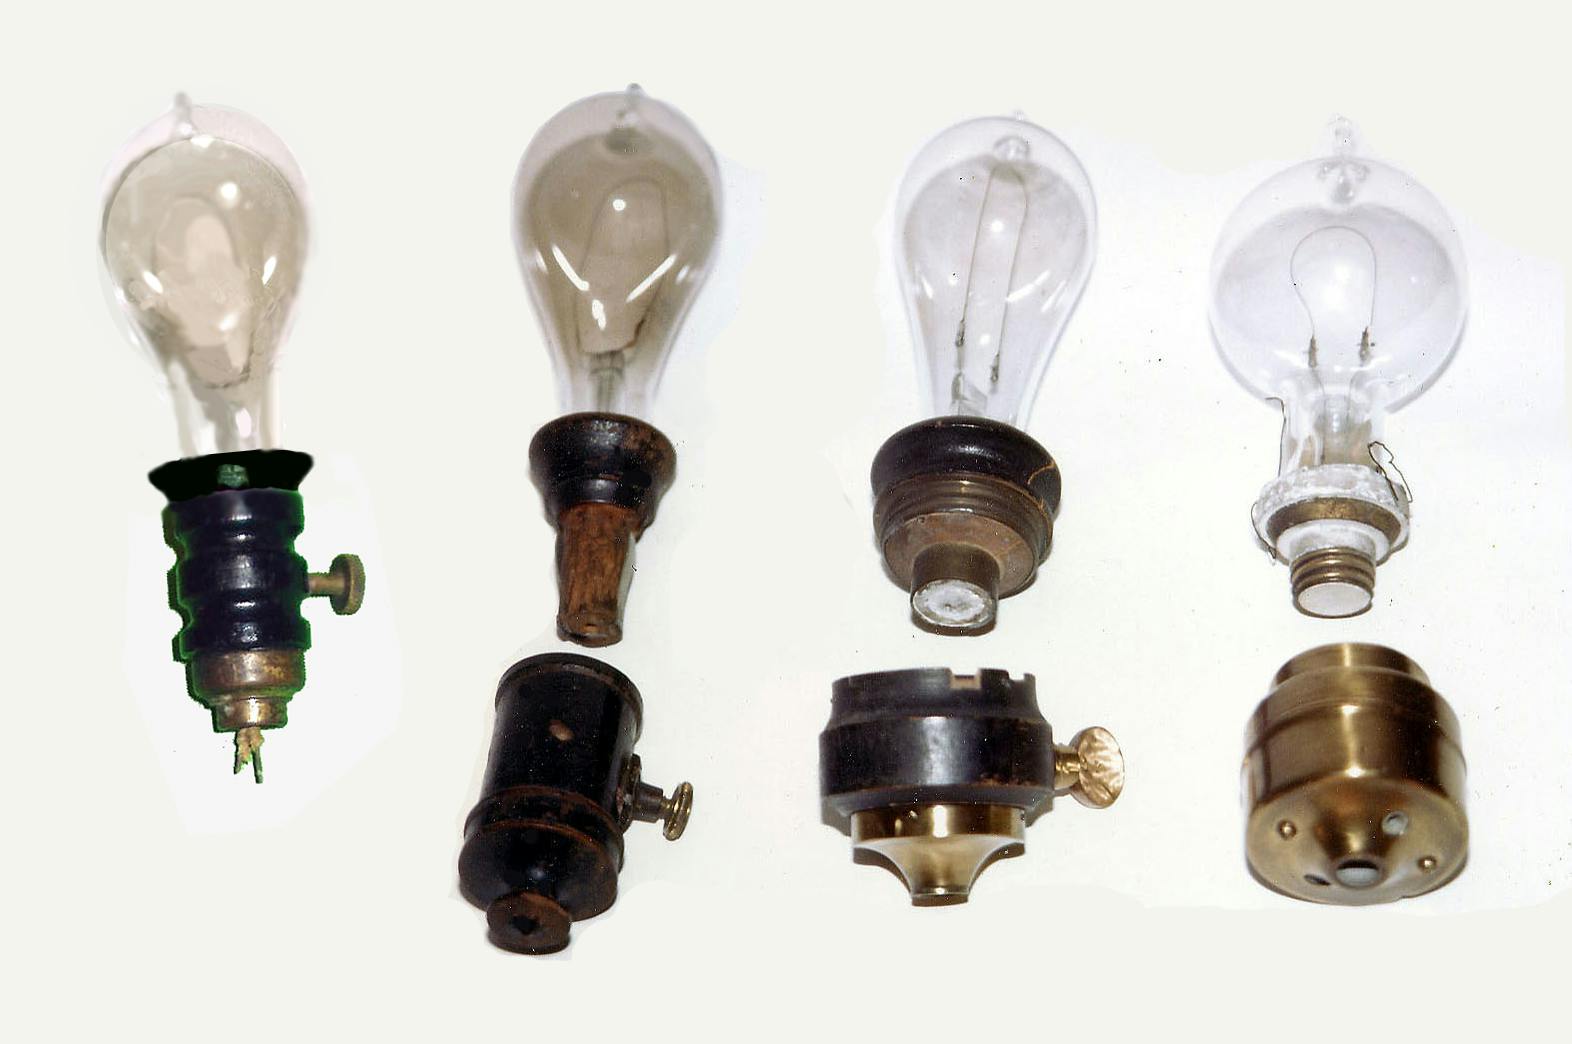 Who discovered electricity bulb with wireless transmitter 